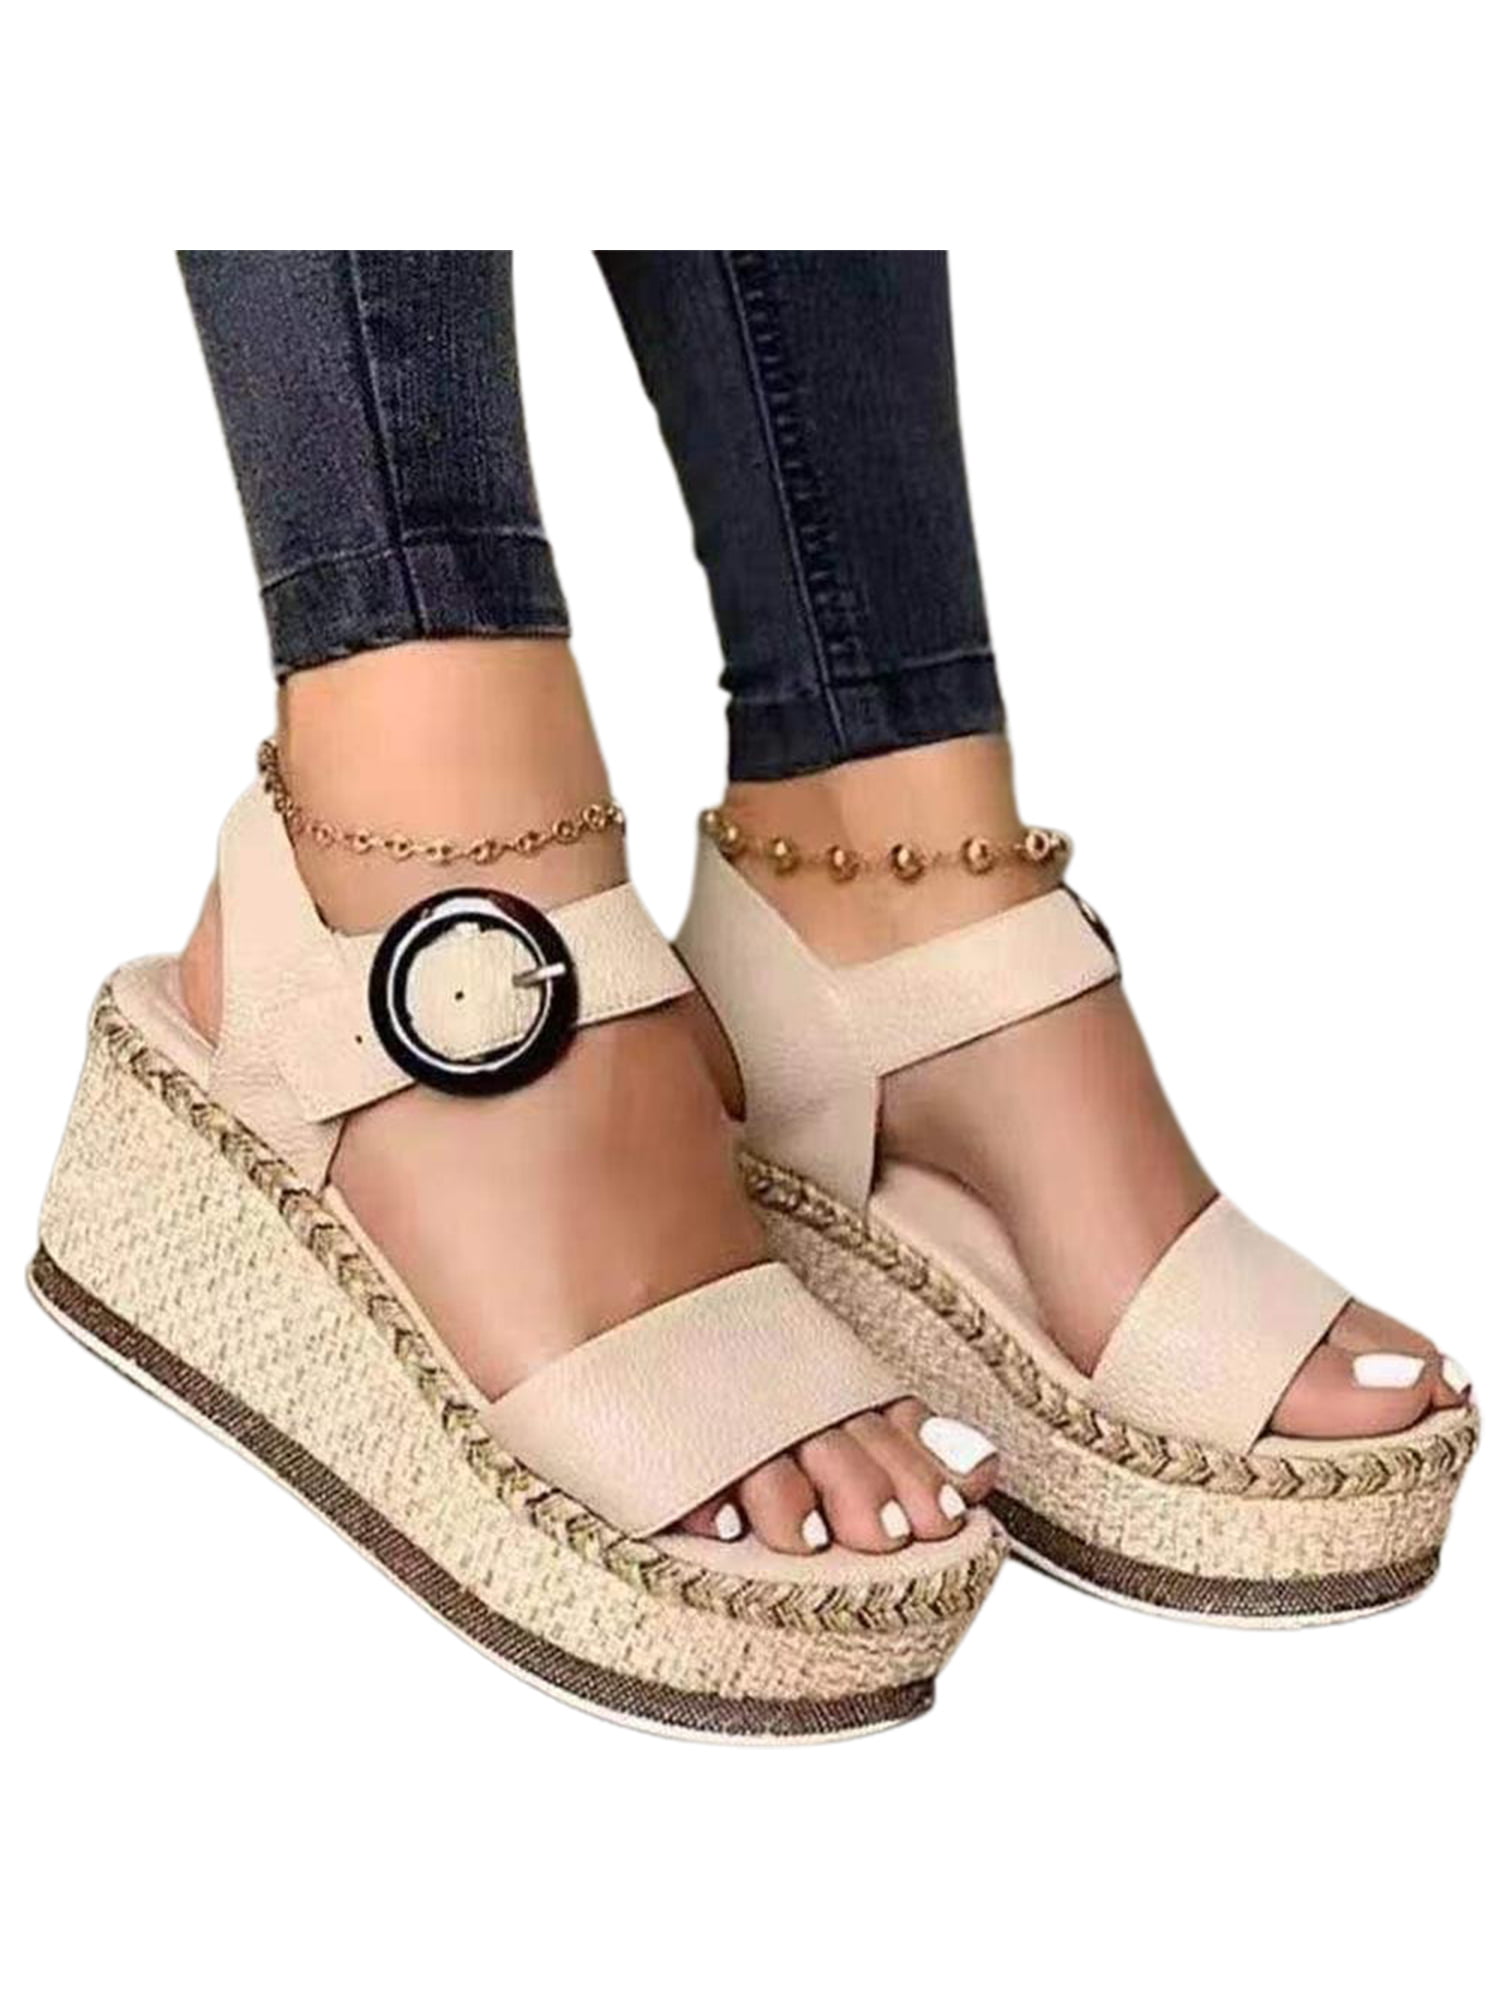 Womens Creeper Wedge Heels Platform Candy Color Buckle Open Toe Sandals Party Sz 